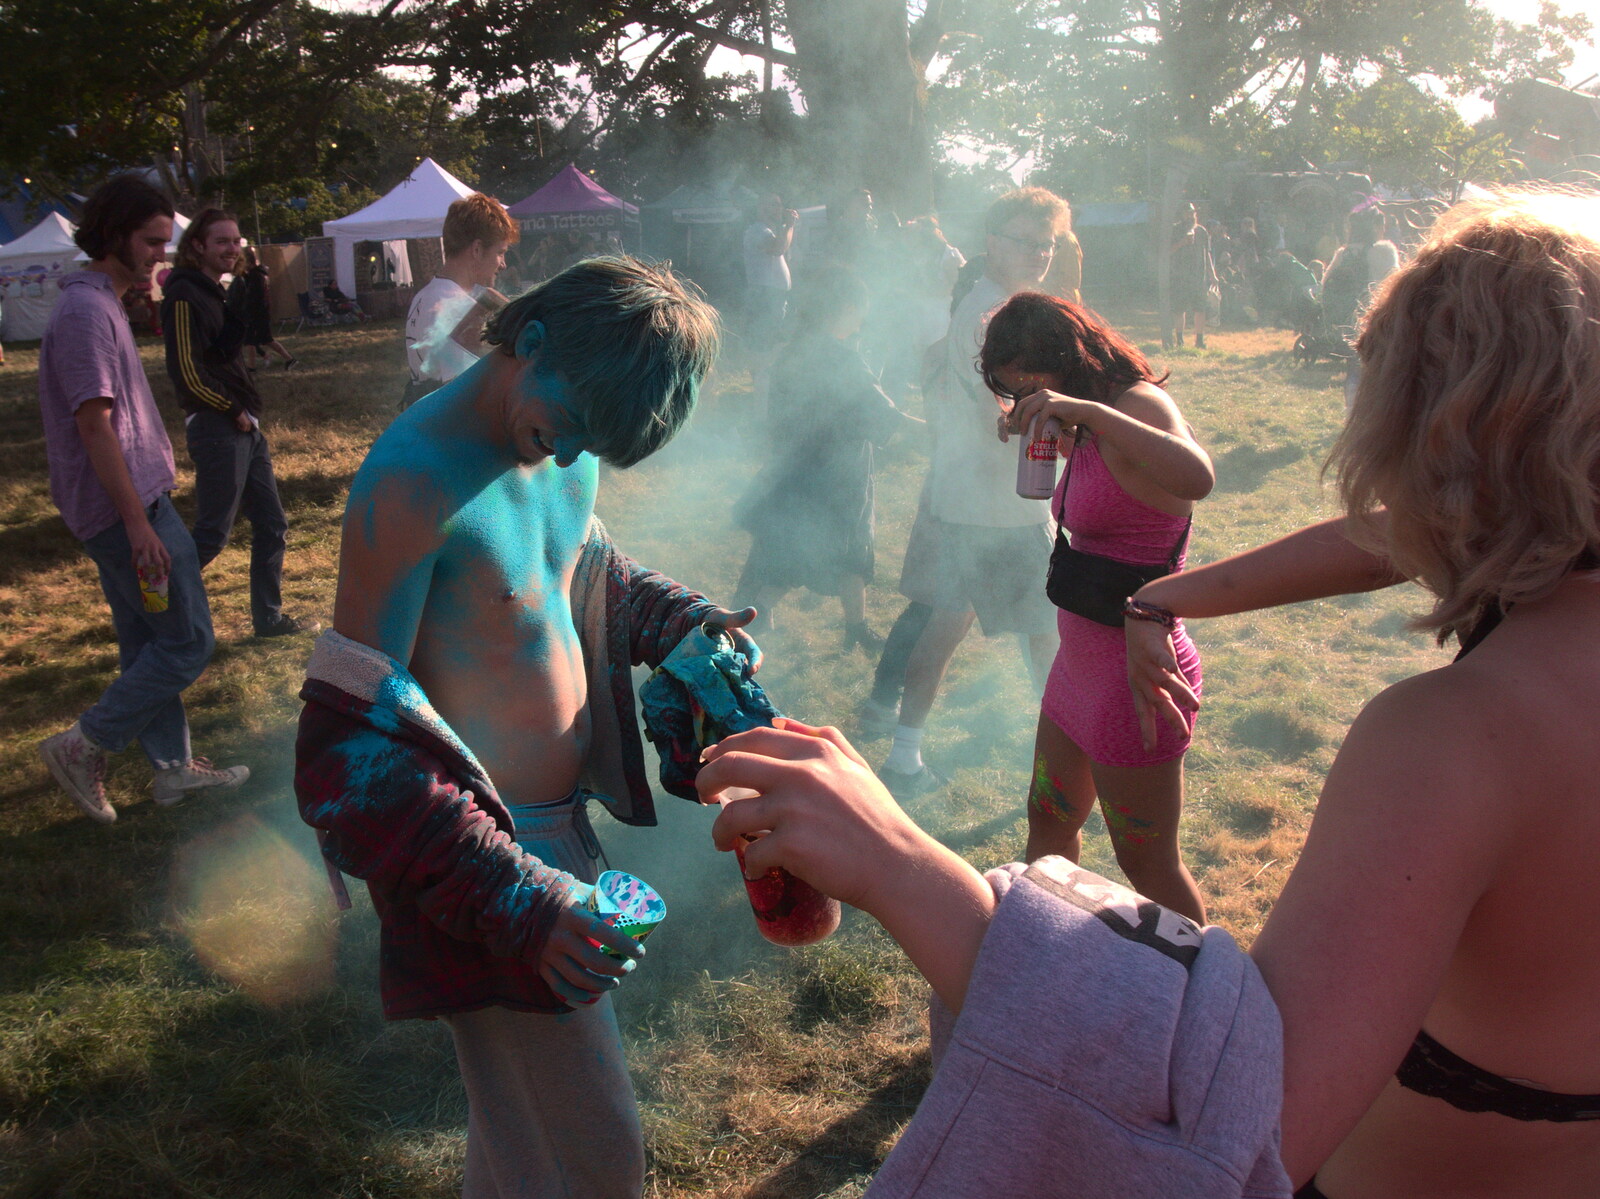 A paint fight breaks out from Maui Waui Festival, Hill Farm, Gressenhall, Norfolk - 28th August 2021